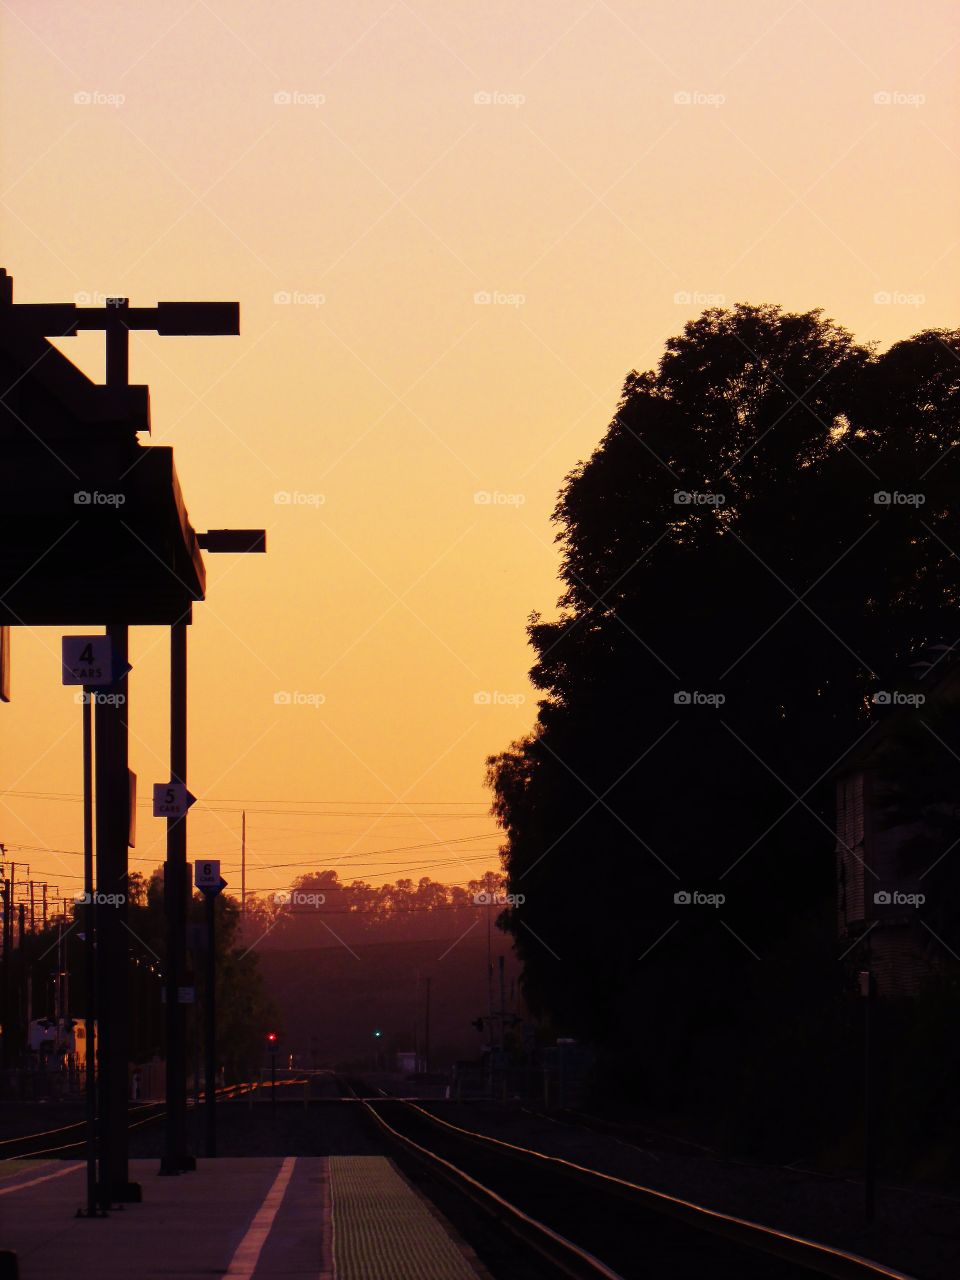 Two signals await the arrival of a Northbound train as the sun sets 